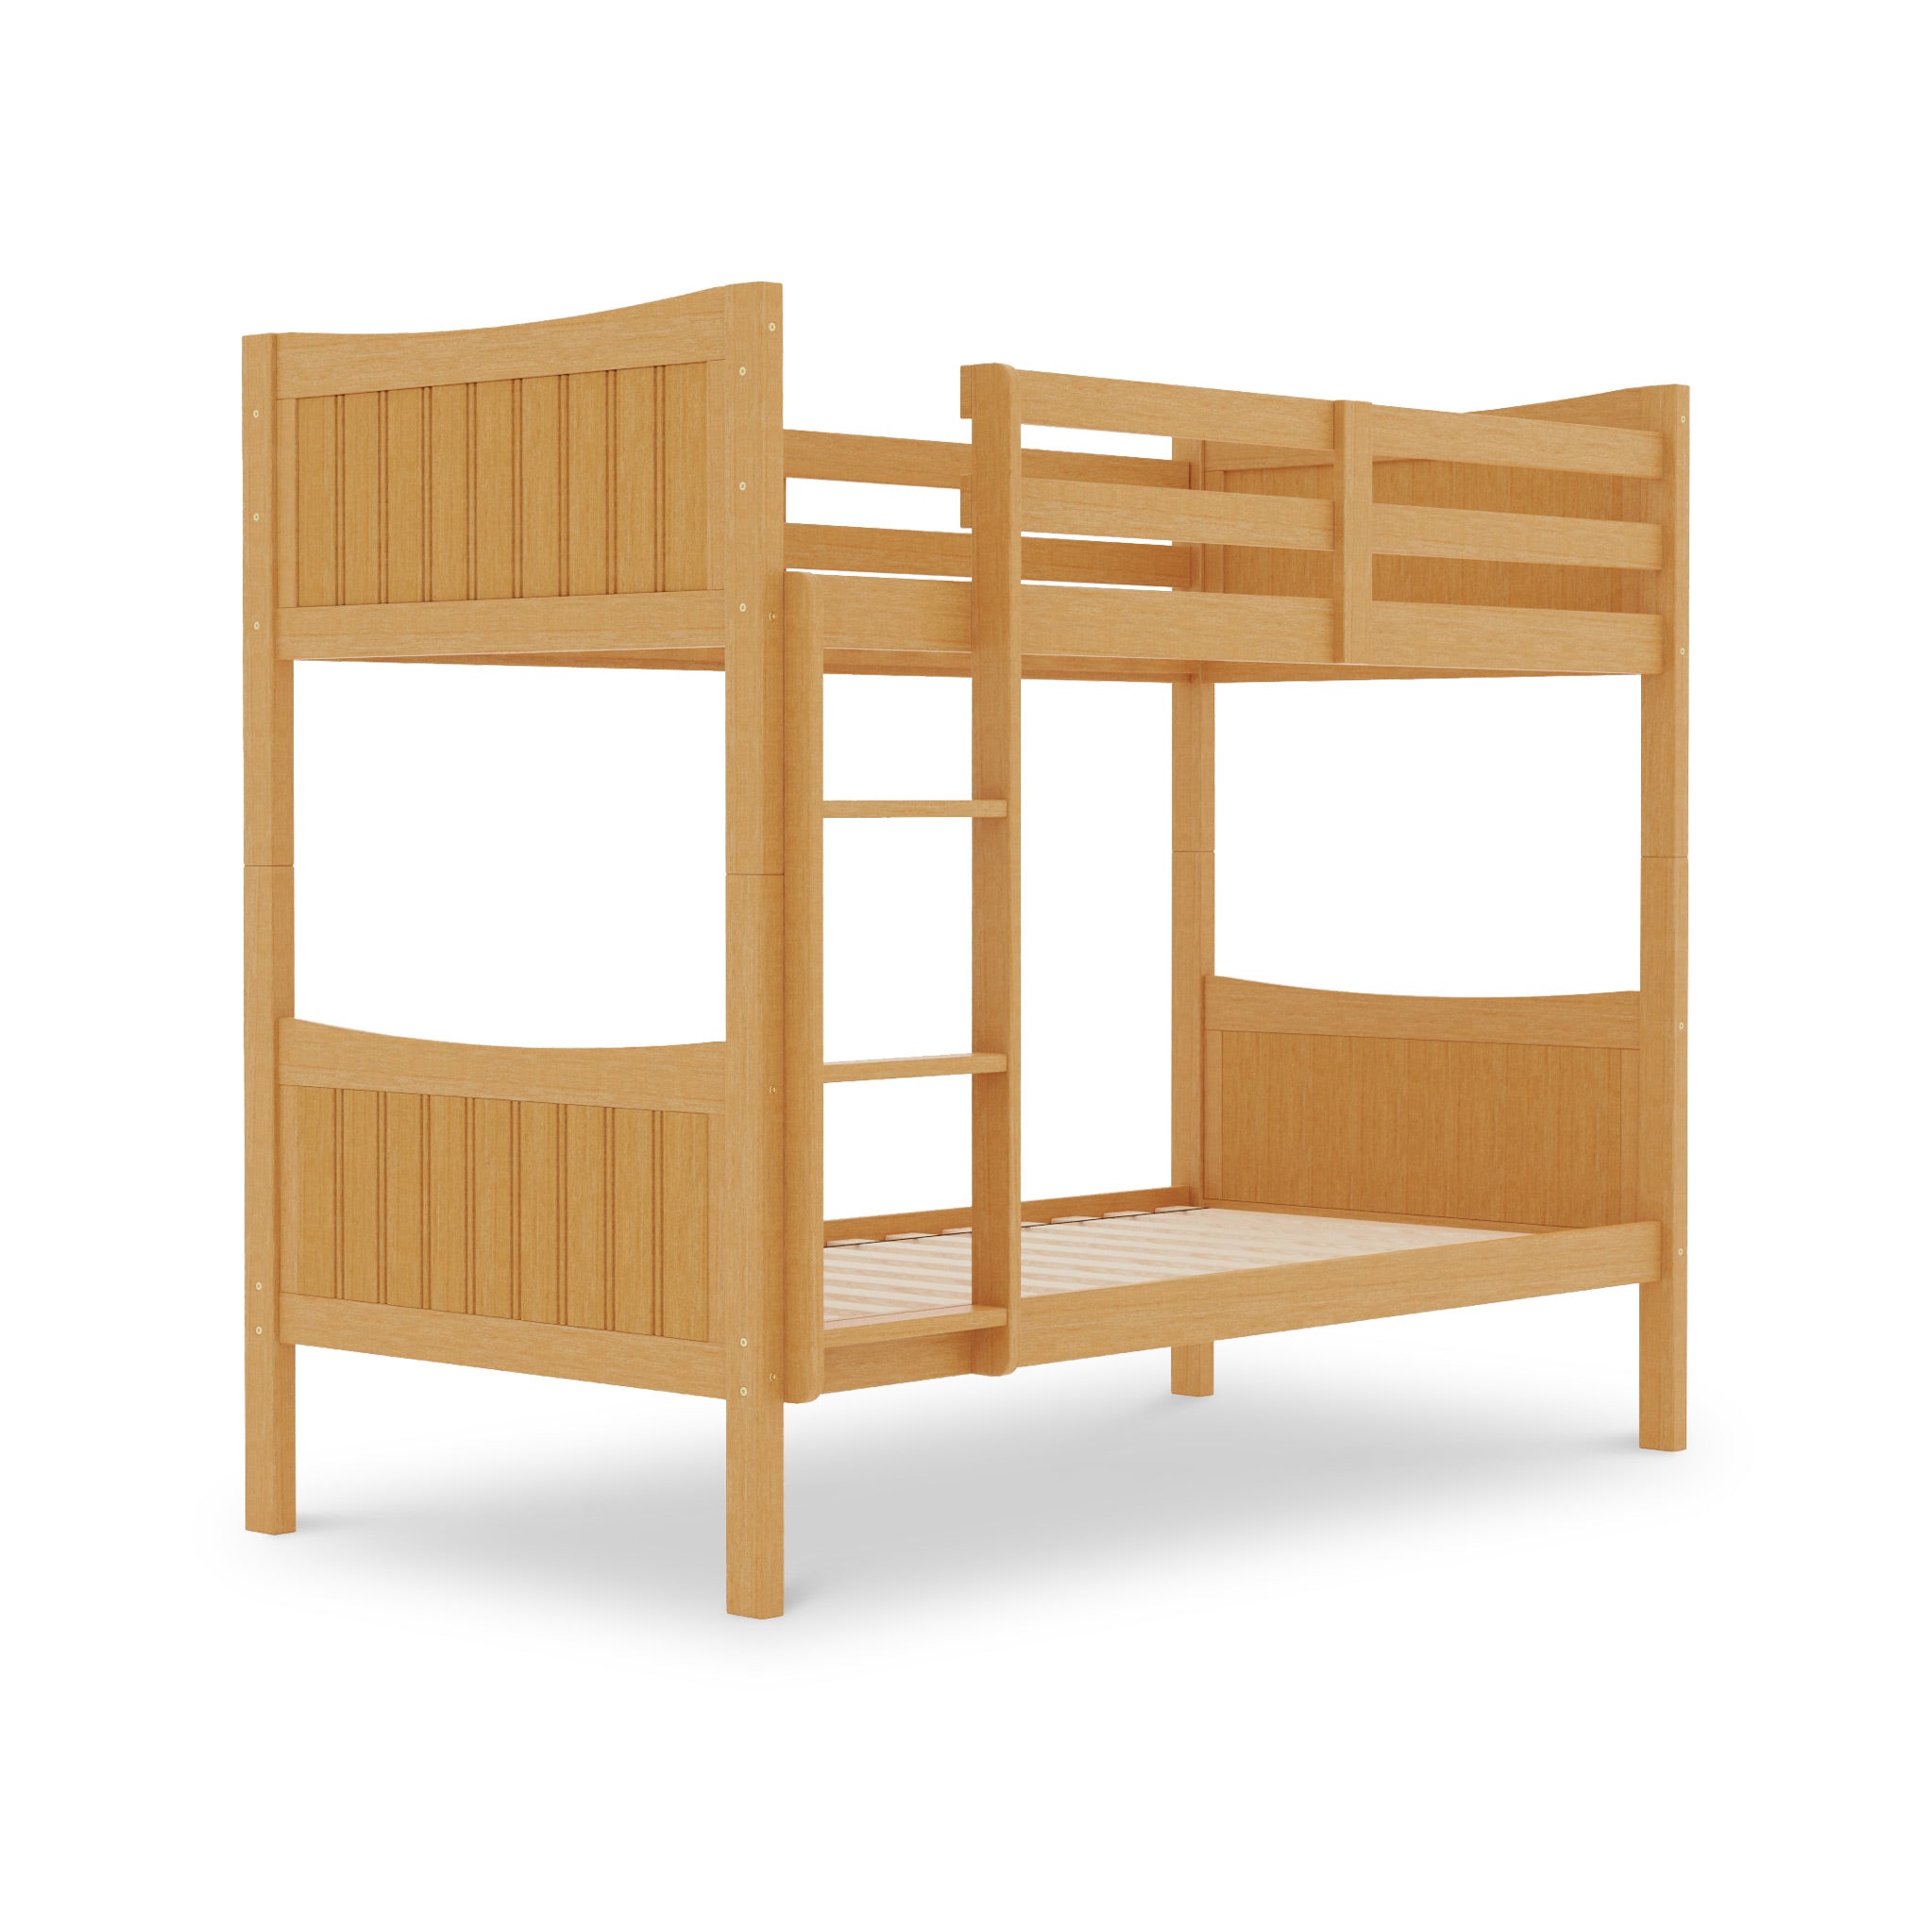 Finchley Convertible Wooden Bunk Bed For Childrens Rooms Roseland